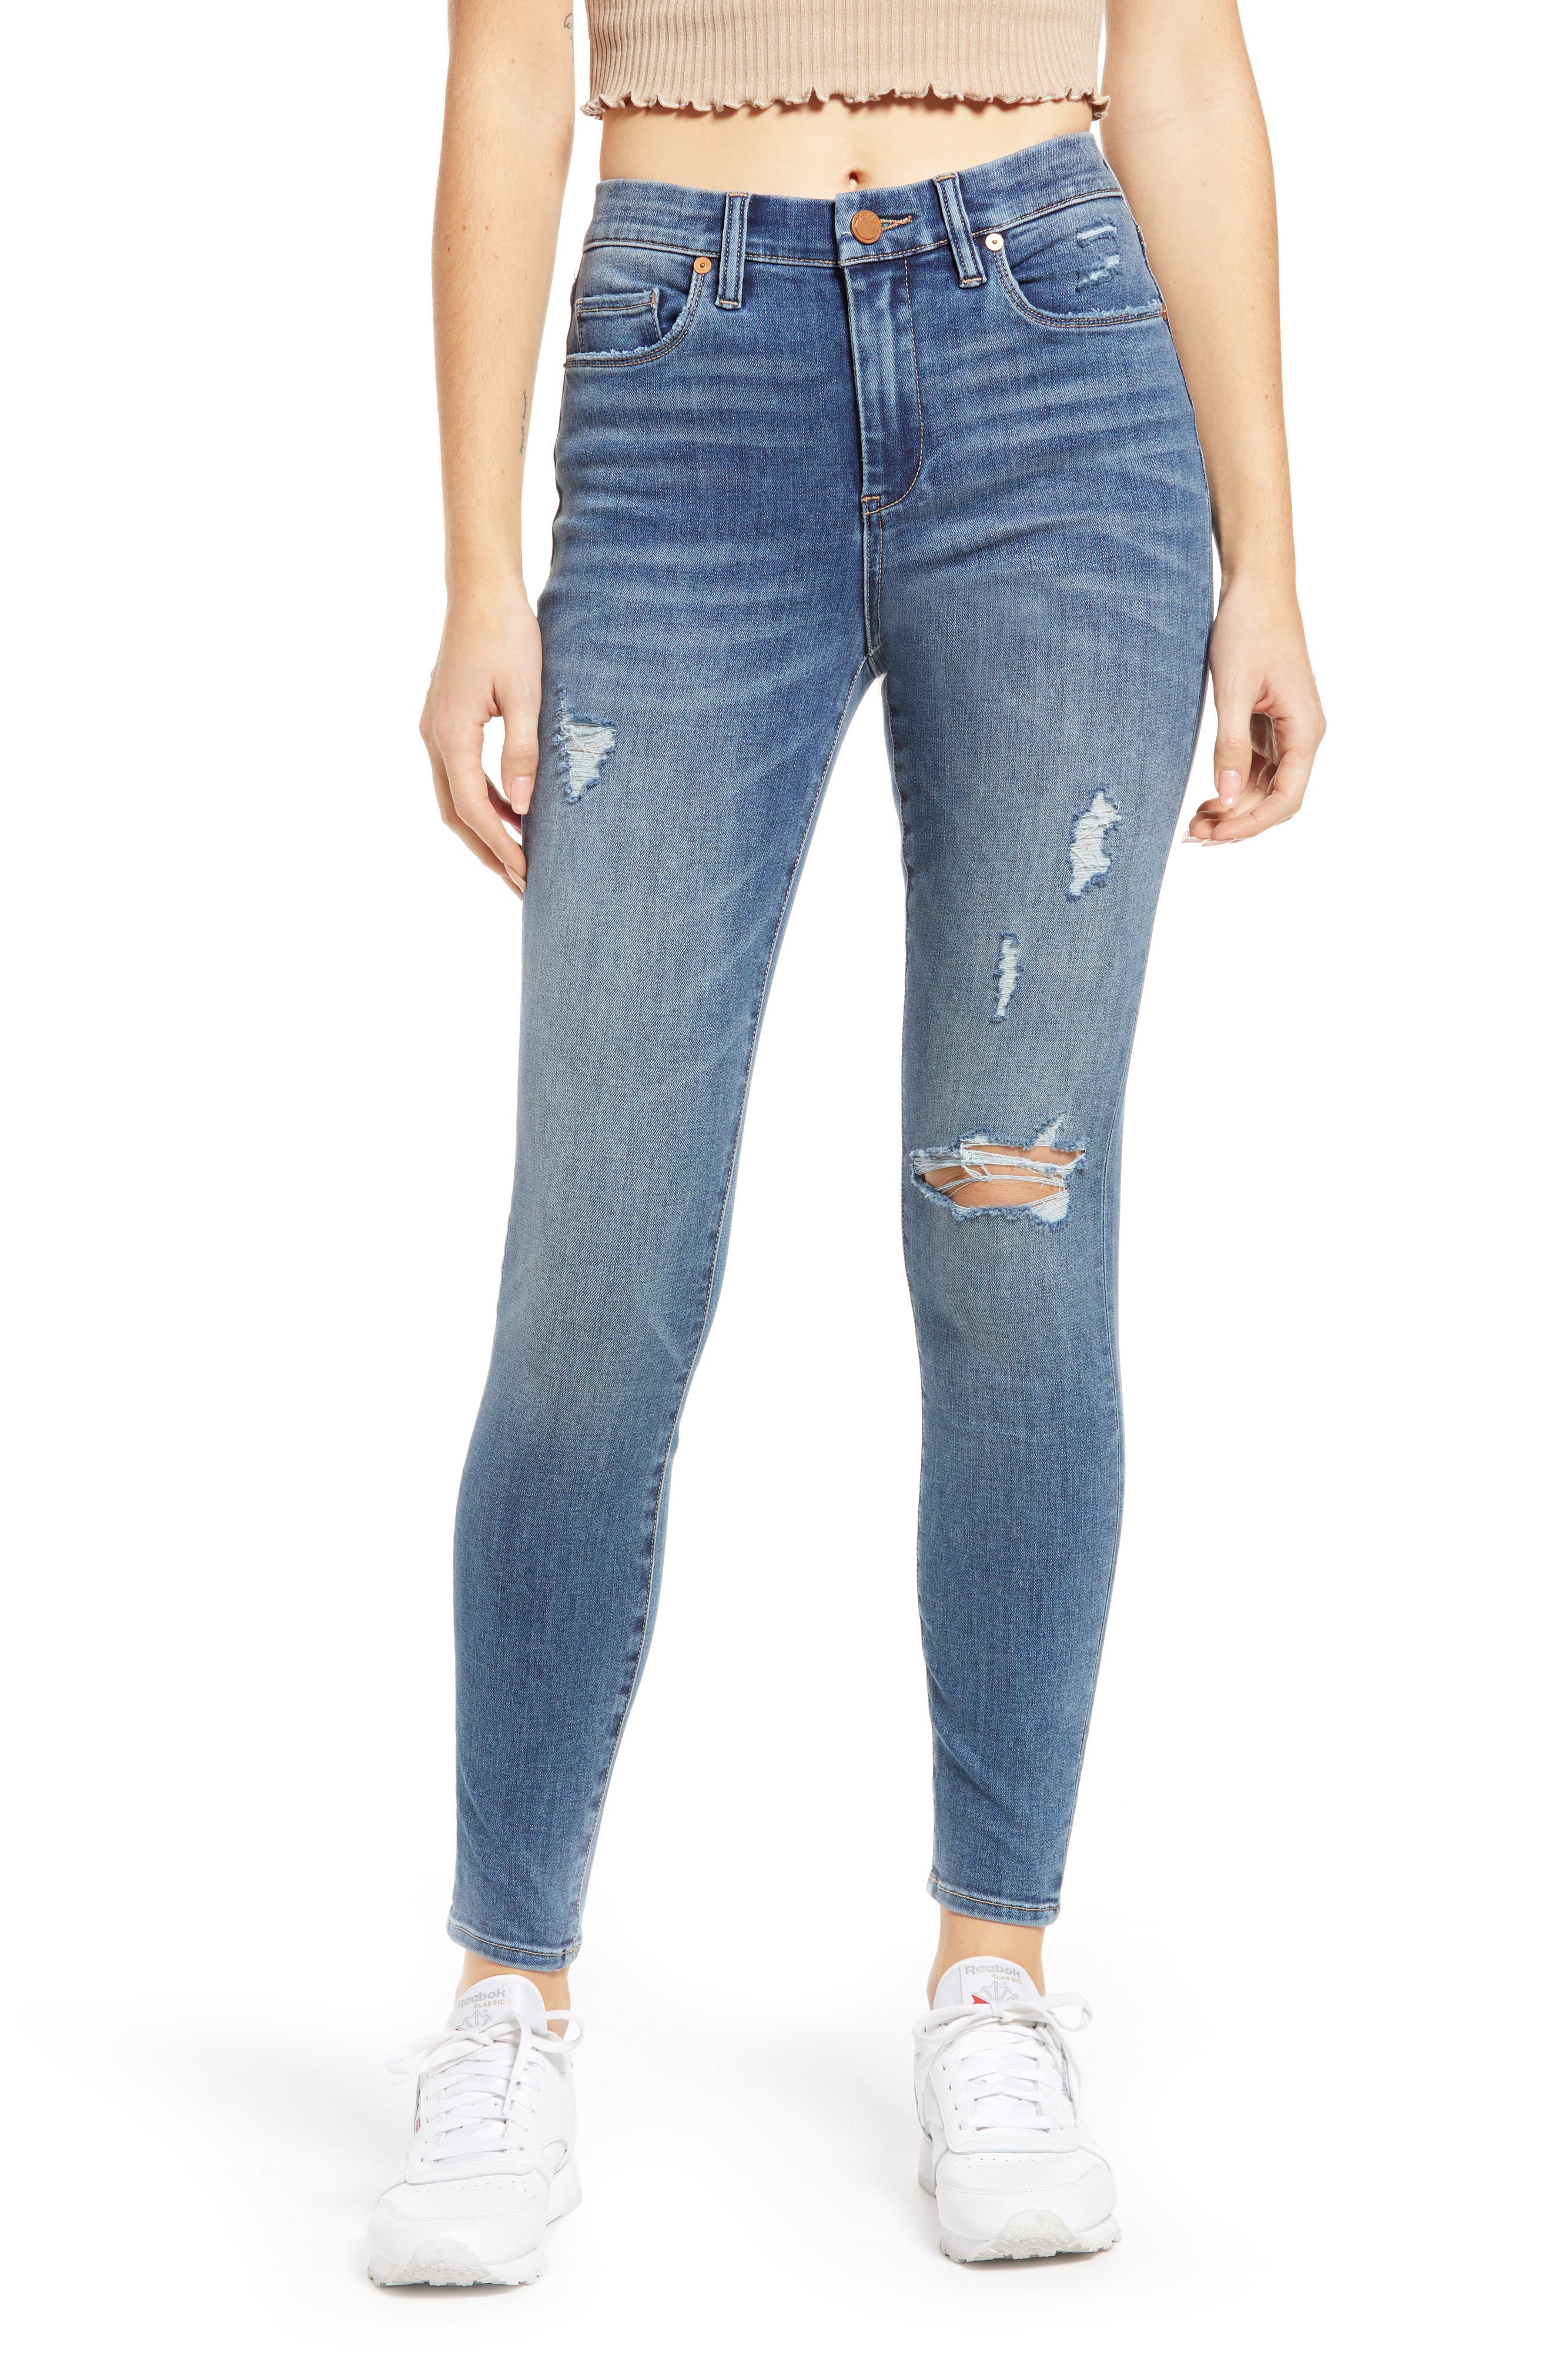 Blanknyc Denim The Bond Ripped Mid Rise Skinny Jeans In Monday Blues